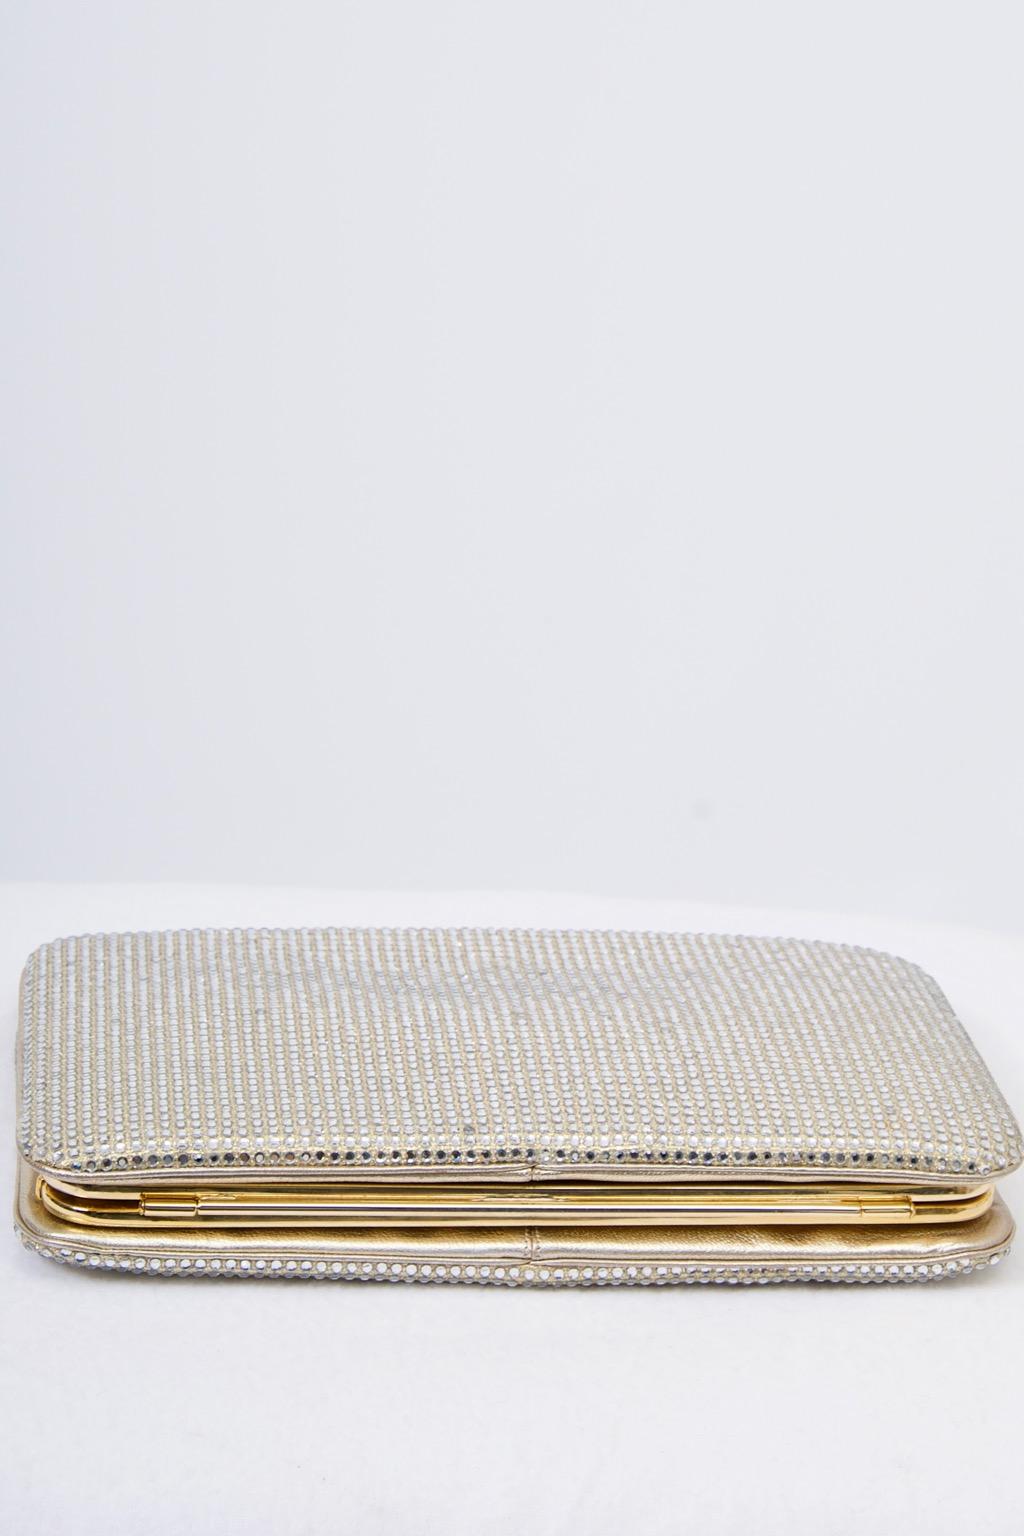 Brown Judith Leiber Crystal Convertible Clutch For Sale